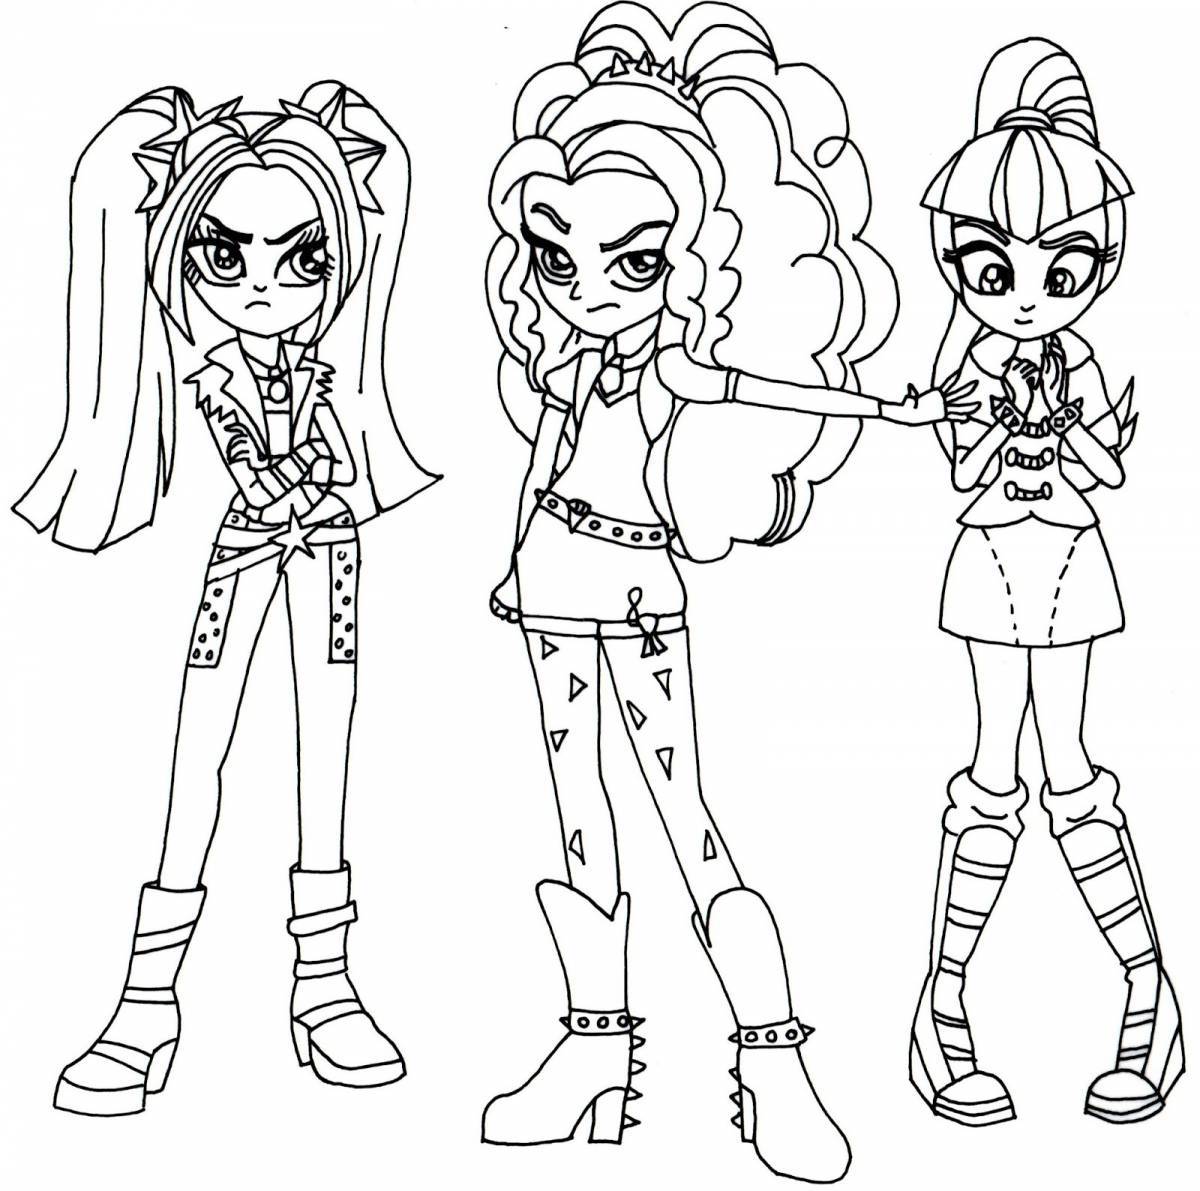 Coloring page my little pony girls